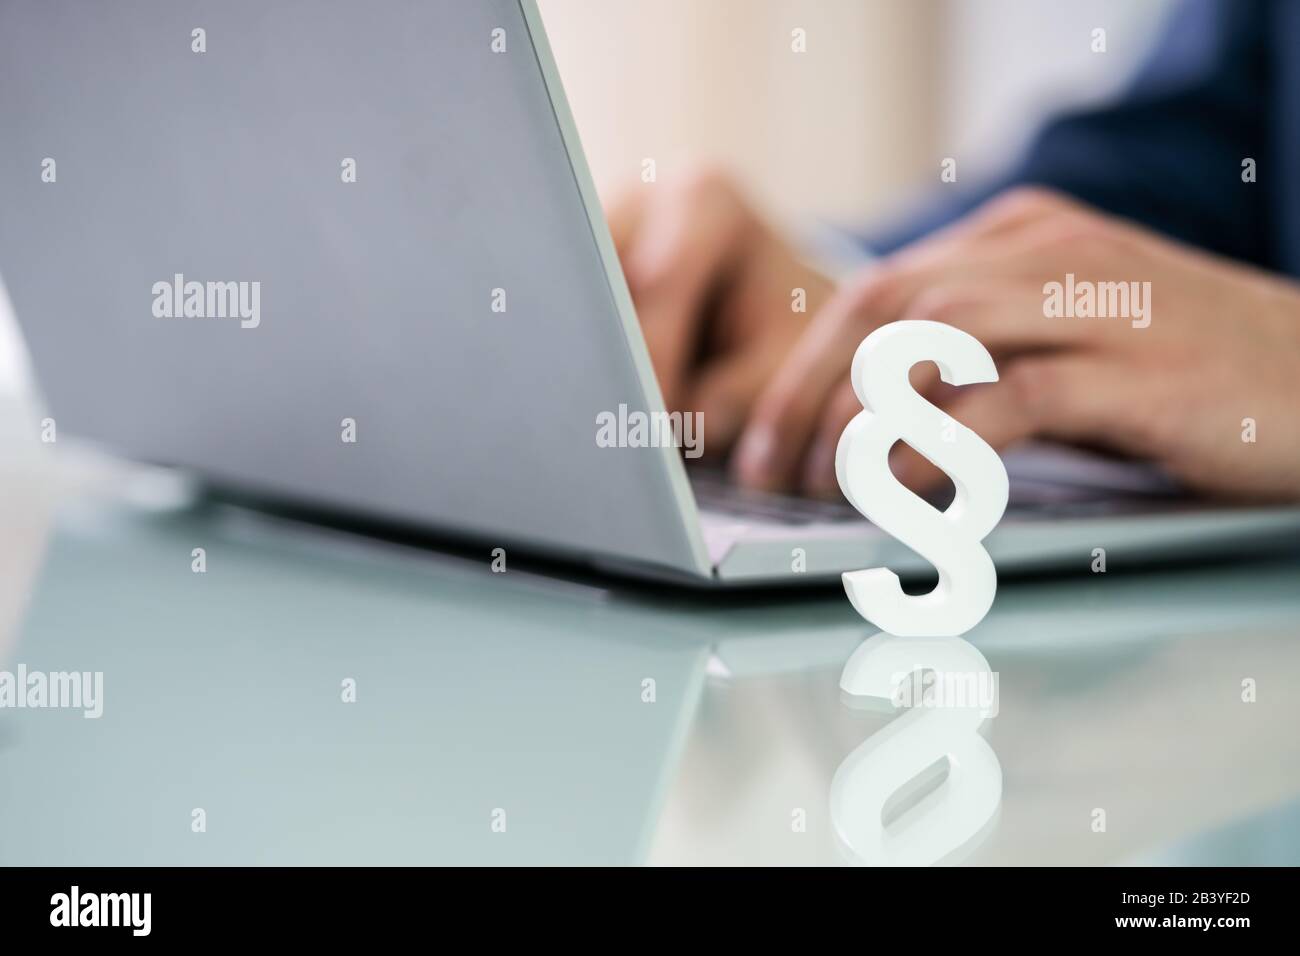 Businessperson's Hand Using Laptop With Paragraph Symbol On Desk Stock Photo